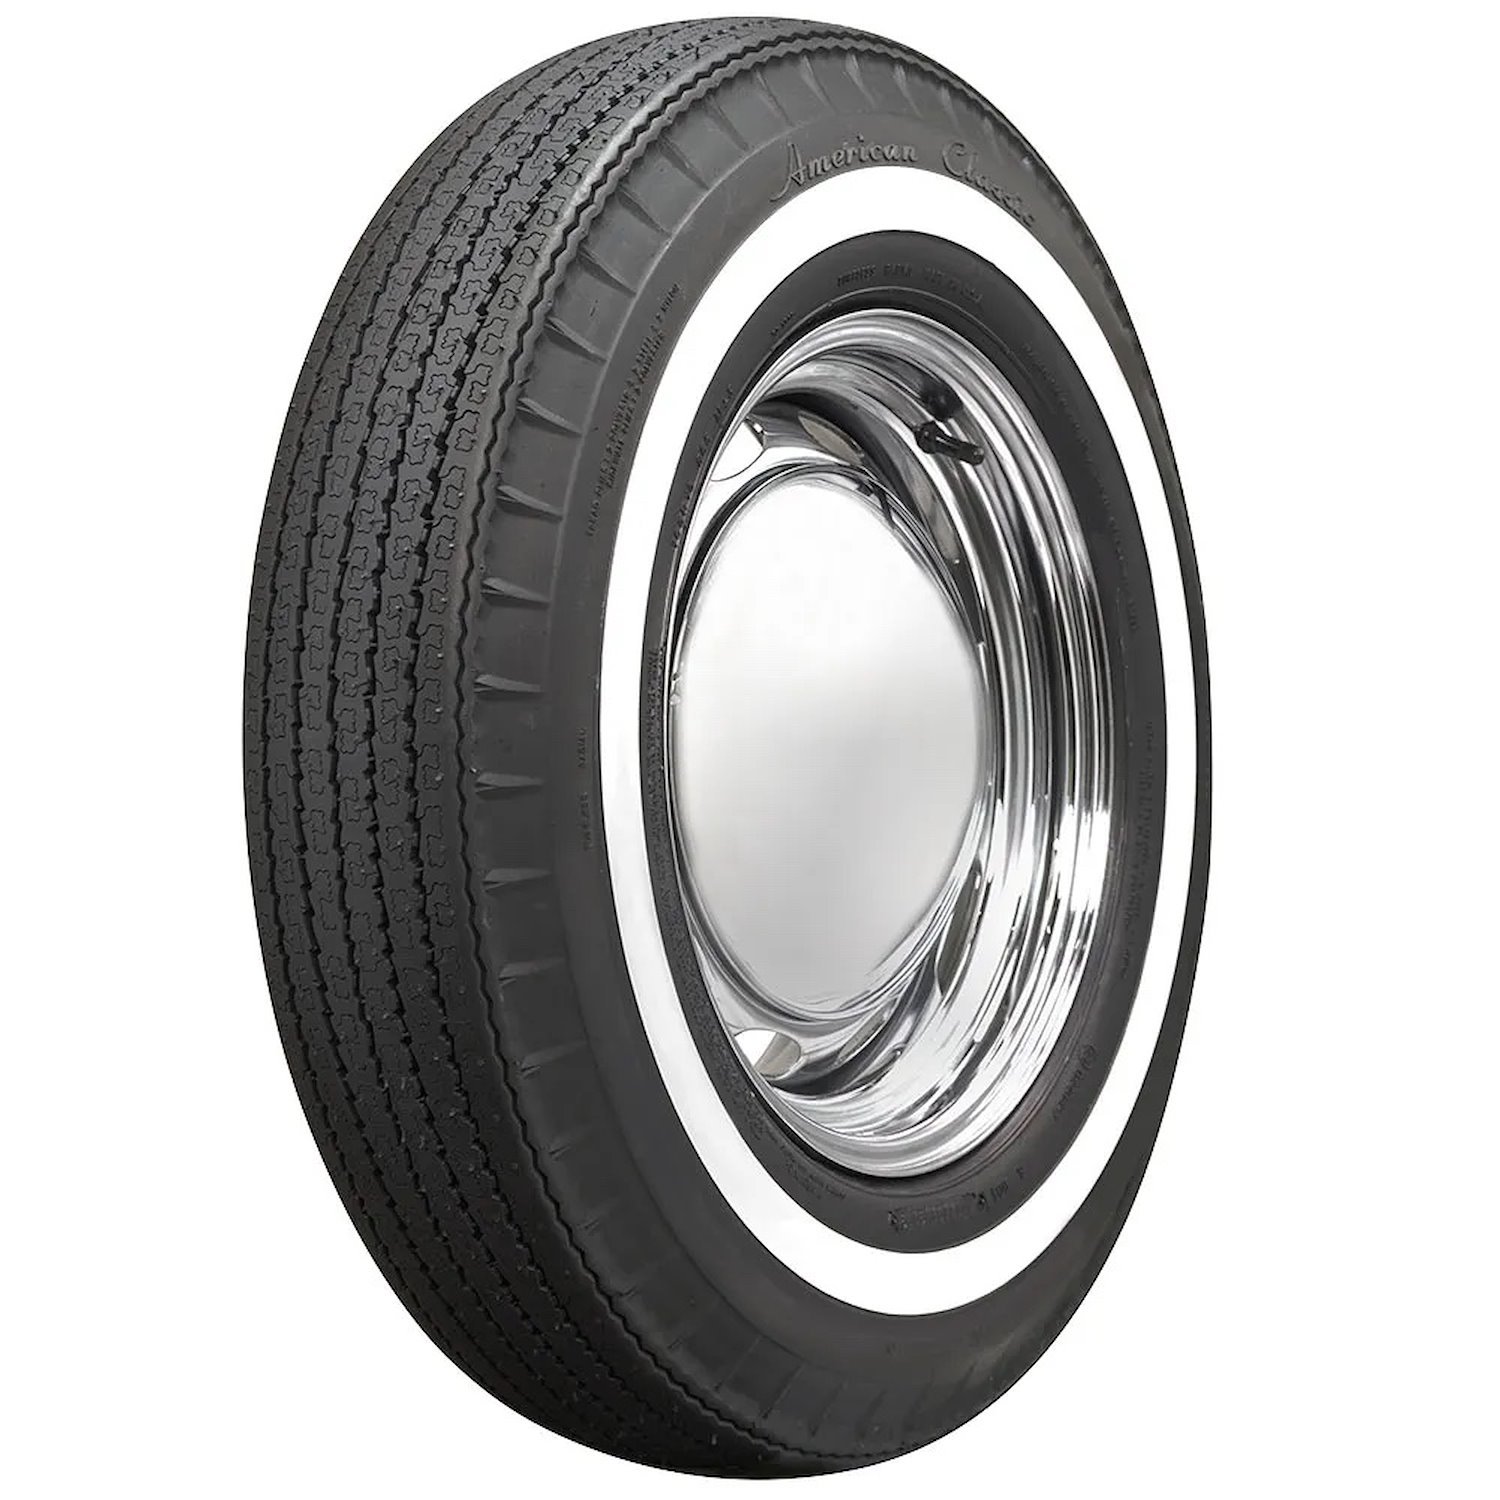 700321 Tire, American Classic Radial, 1-Inch Whitewall, 820R15